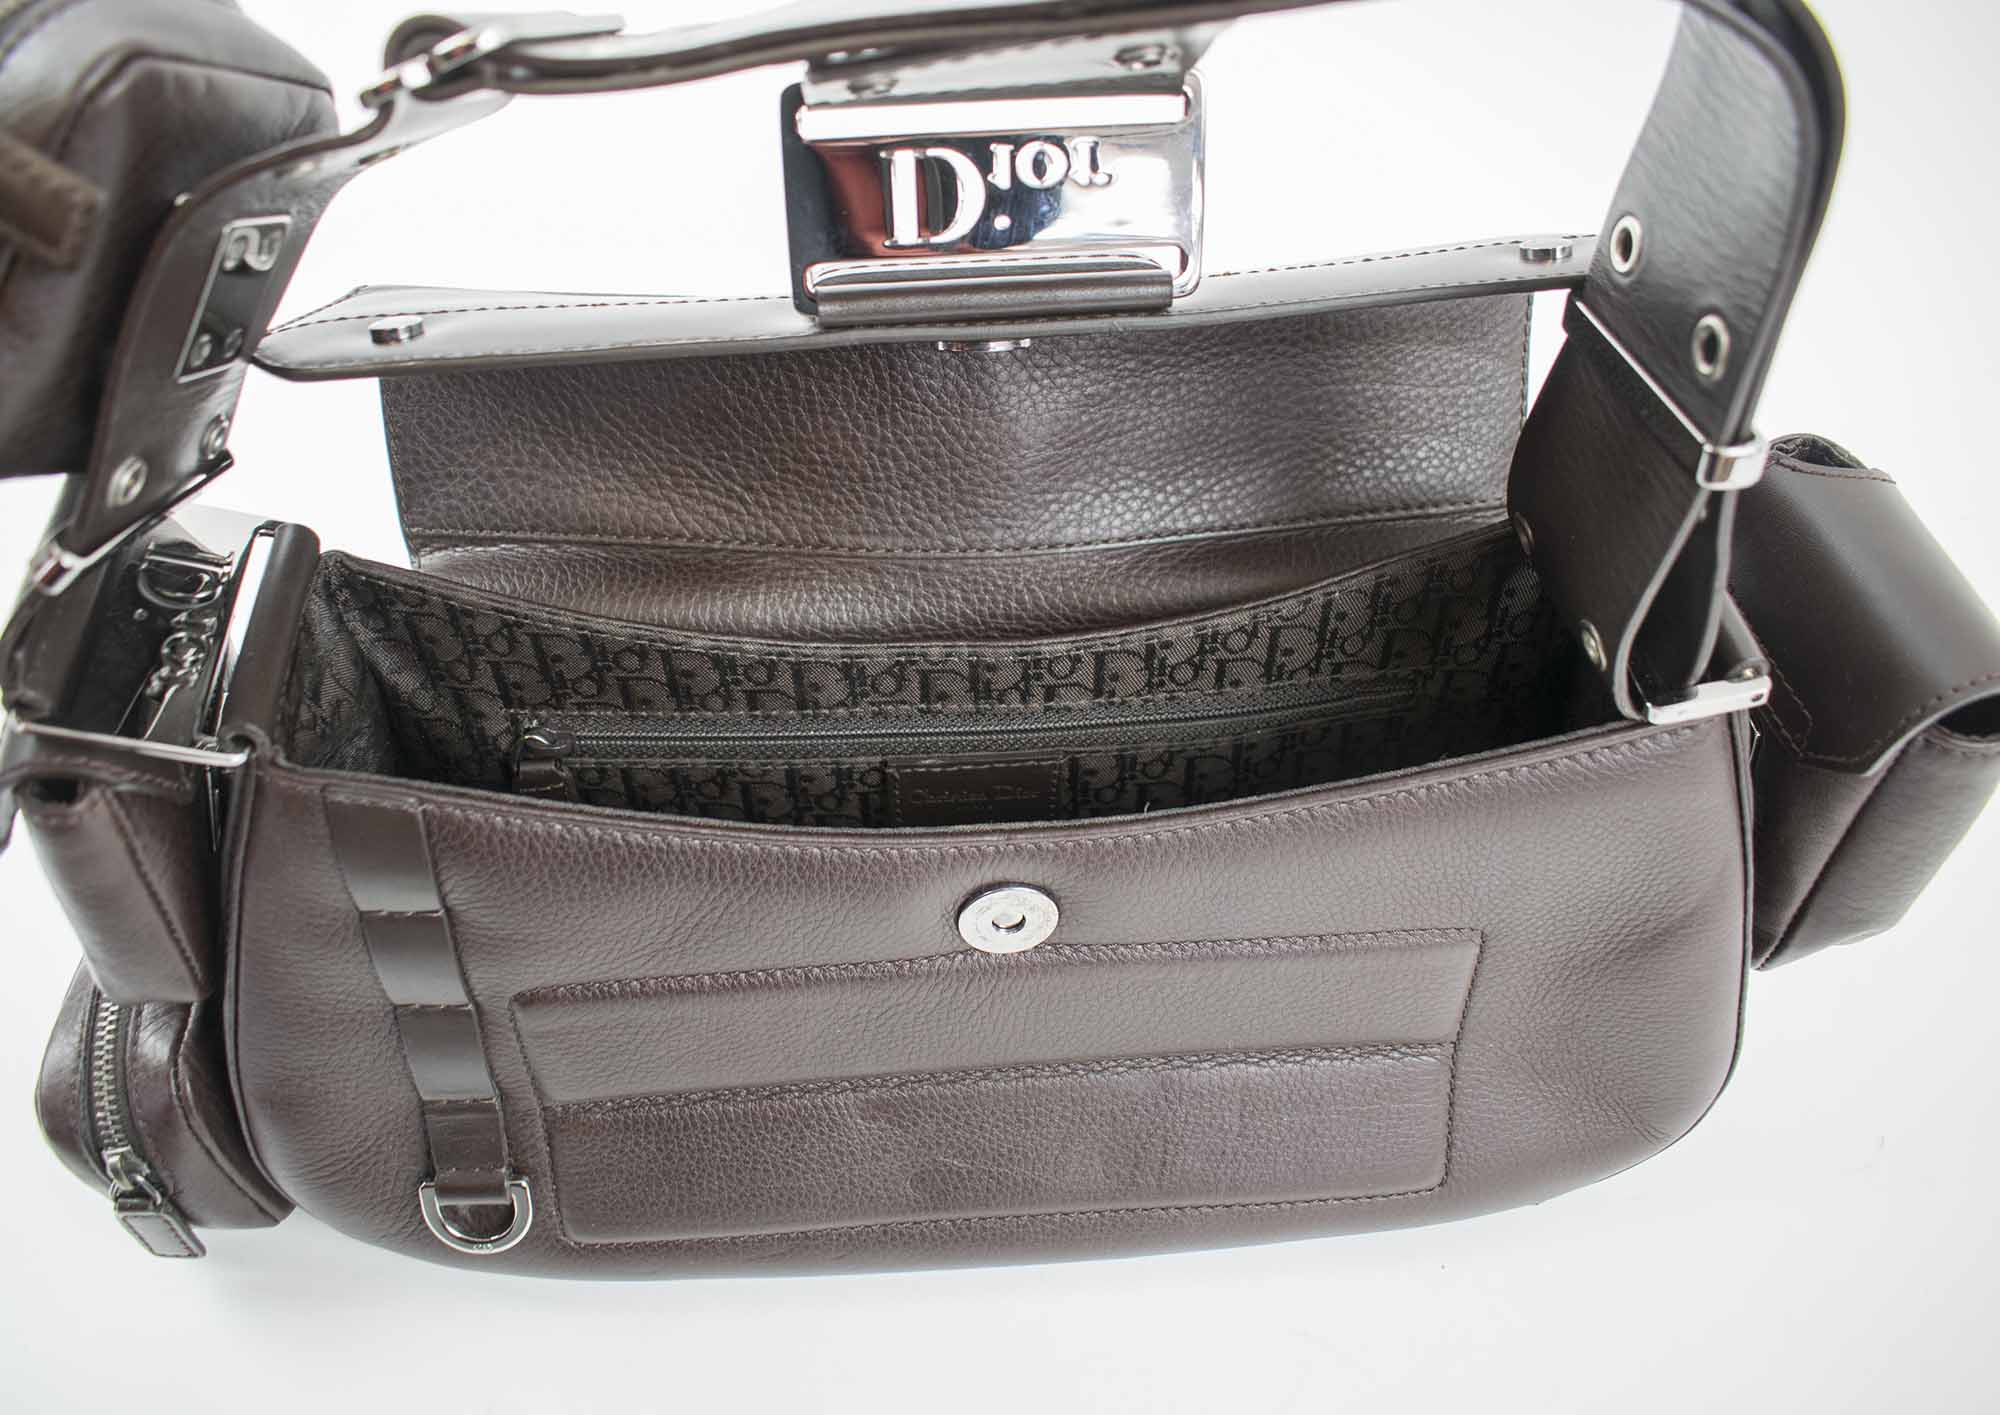 CHRISTIAN DIOR STREET CHIC COLUMBUS BAG, brown leather with brown monogram  fabric lining, multipockets outside, leather shoulder top handle, bottom  feet, frontal flap closure, 30cm (excluding pockets) x 14cm H x 10cm.